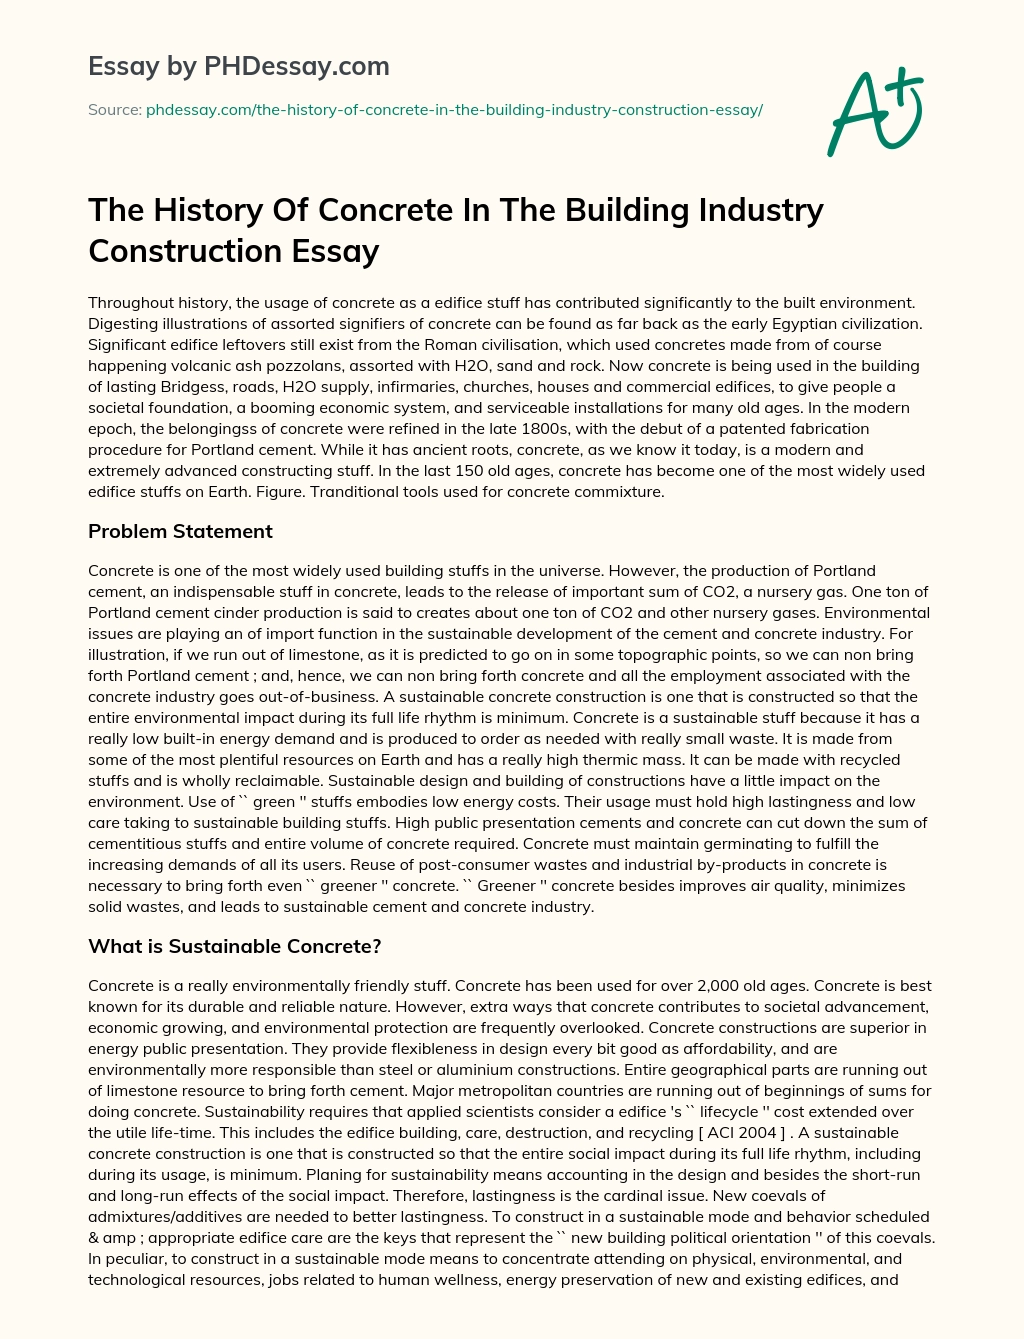 The History Of Concrete In The Building Industry essay